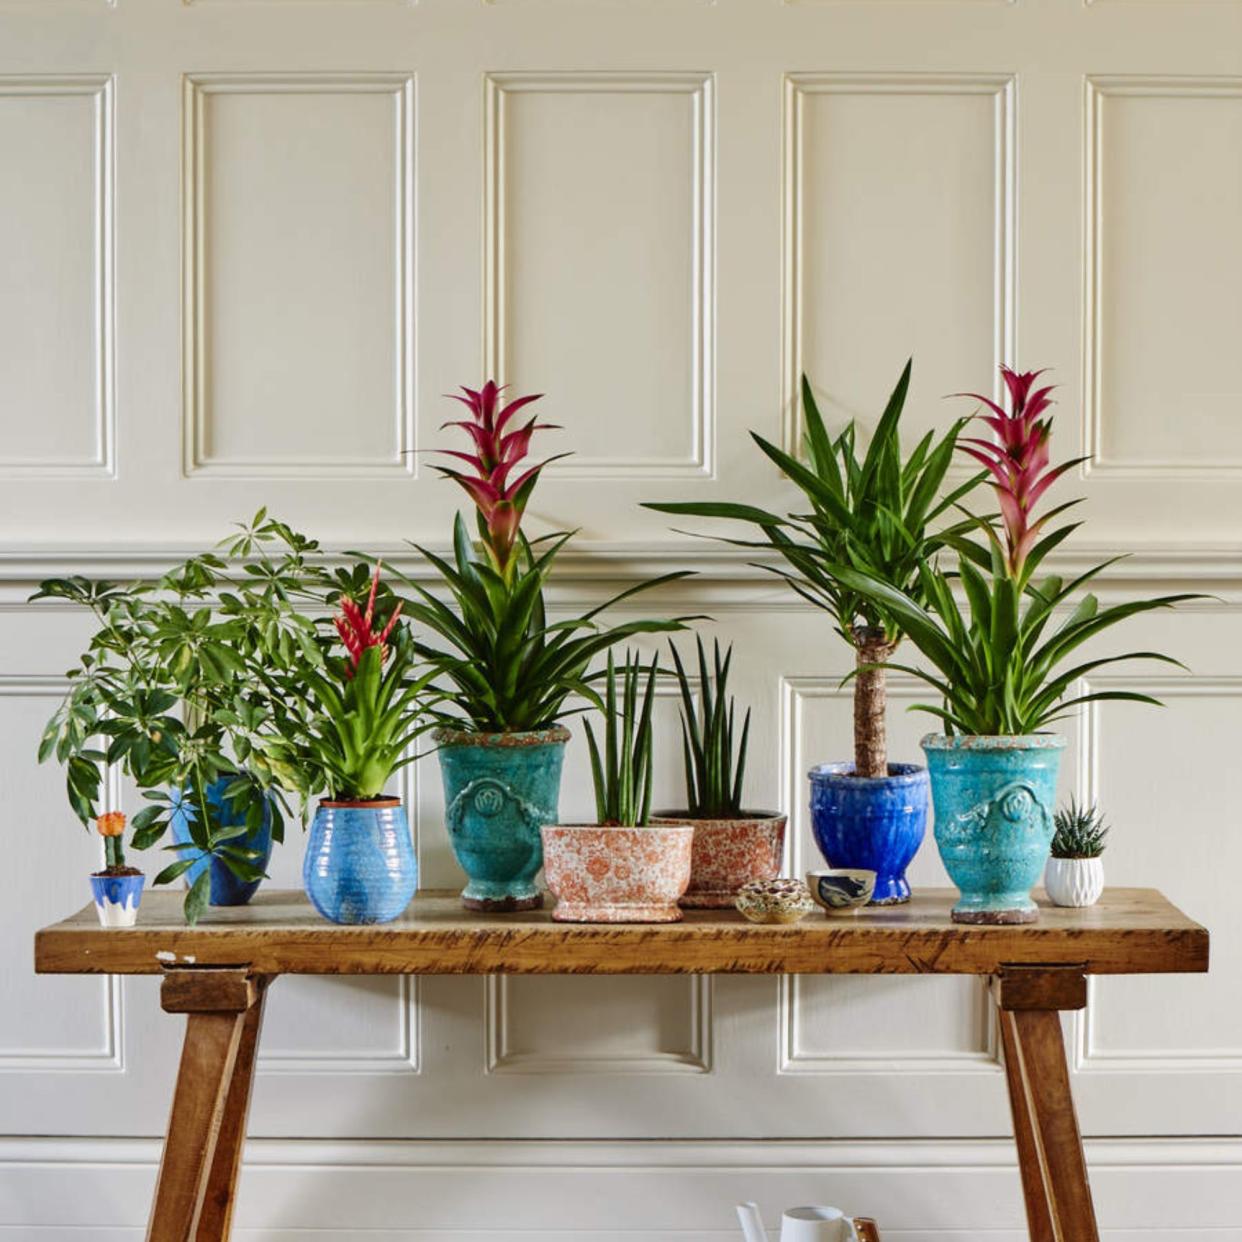  Displaying houseplants on a wooden bench. 